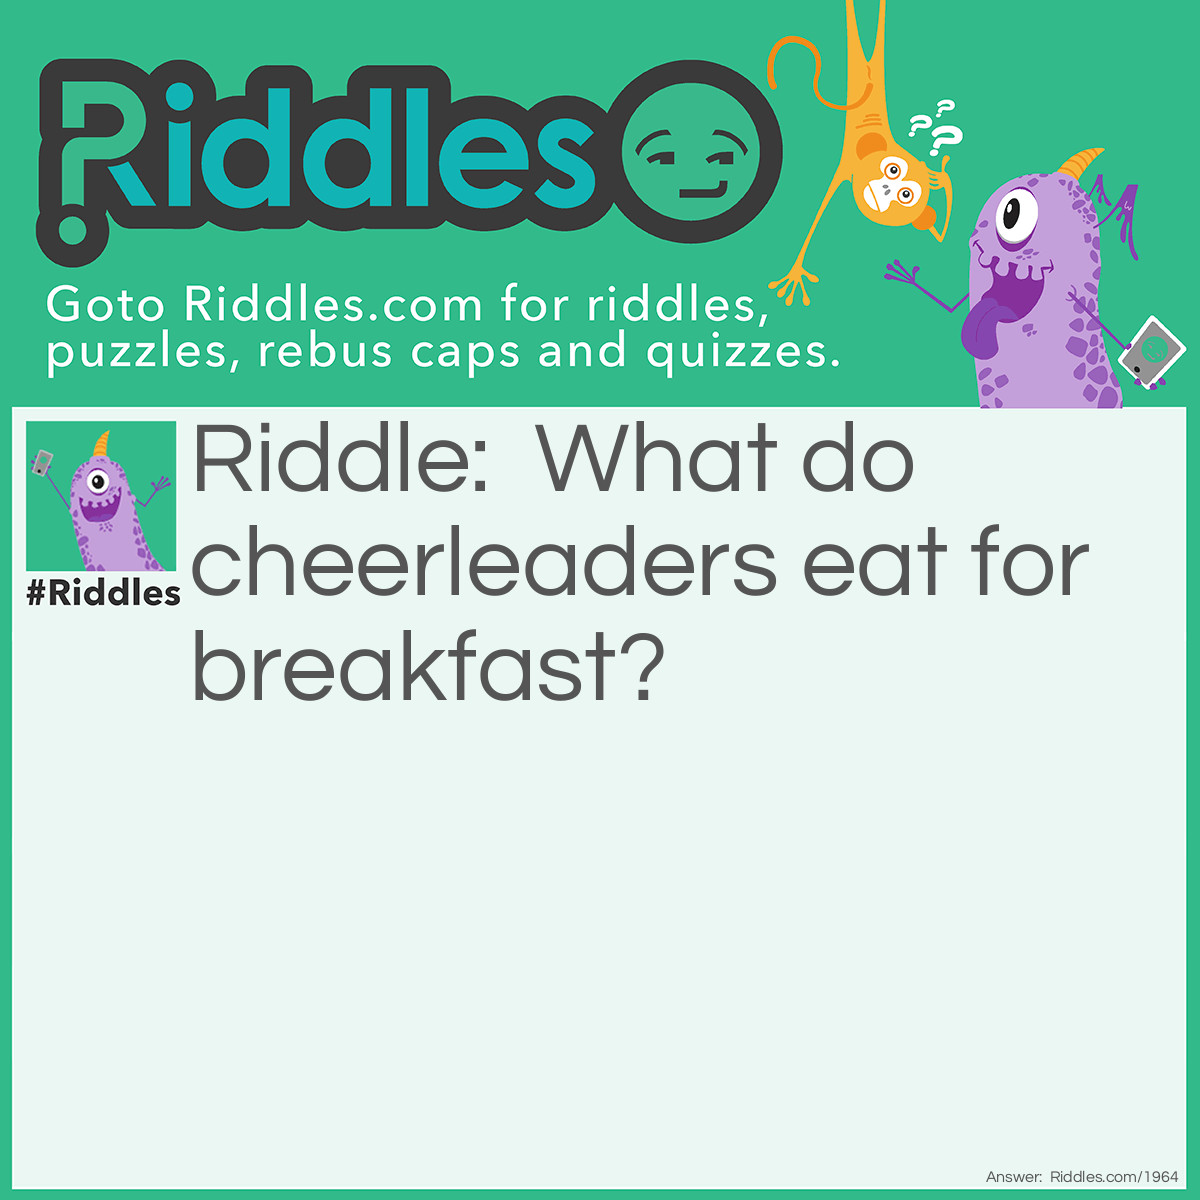 Riddle: What do cheerleaders eat for breakfast? Answer: Cheer-eee-ohs!